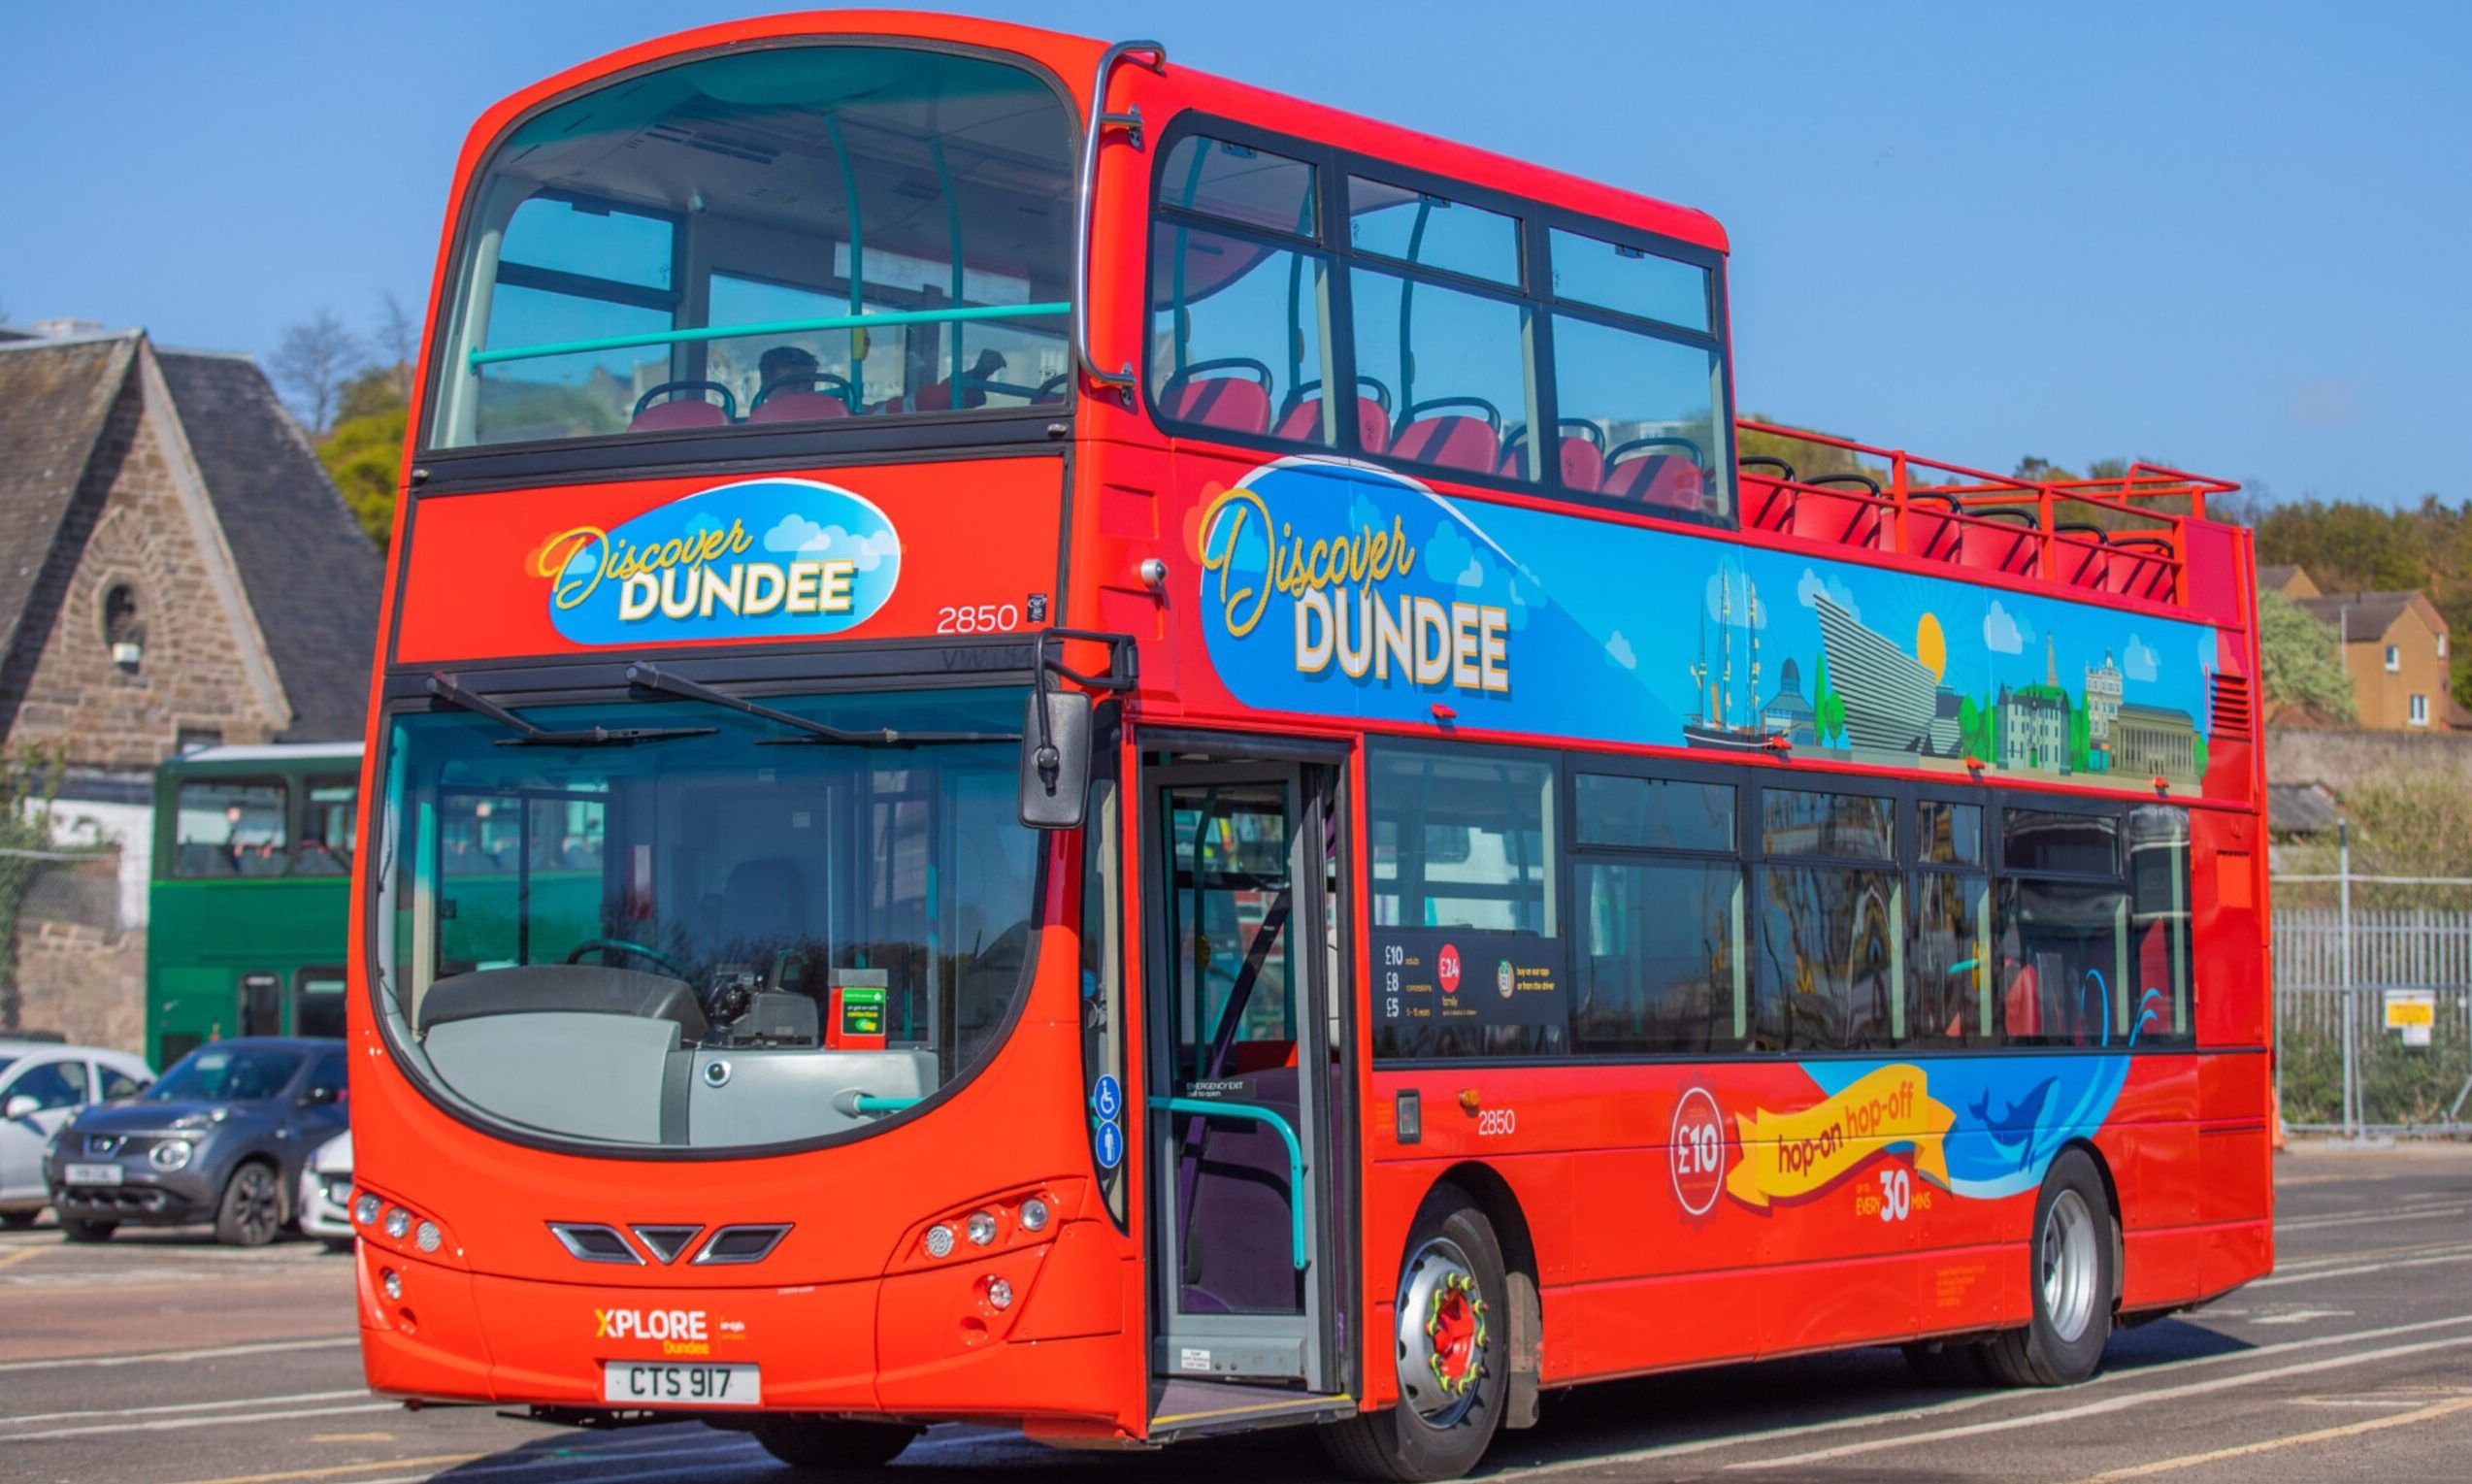 Xplore Dundee's bus tours will run for a third year